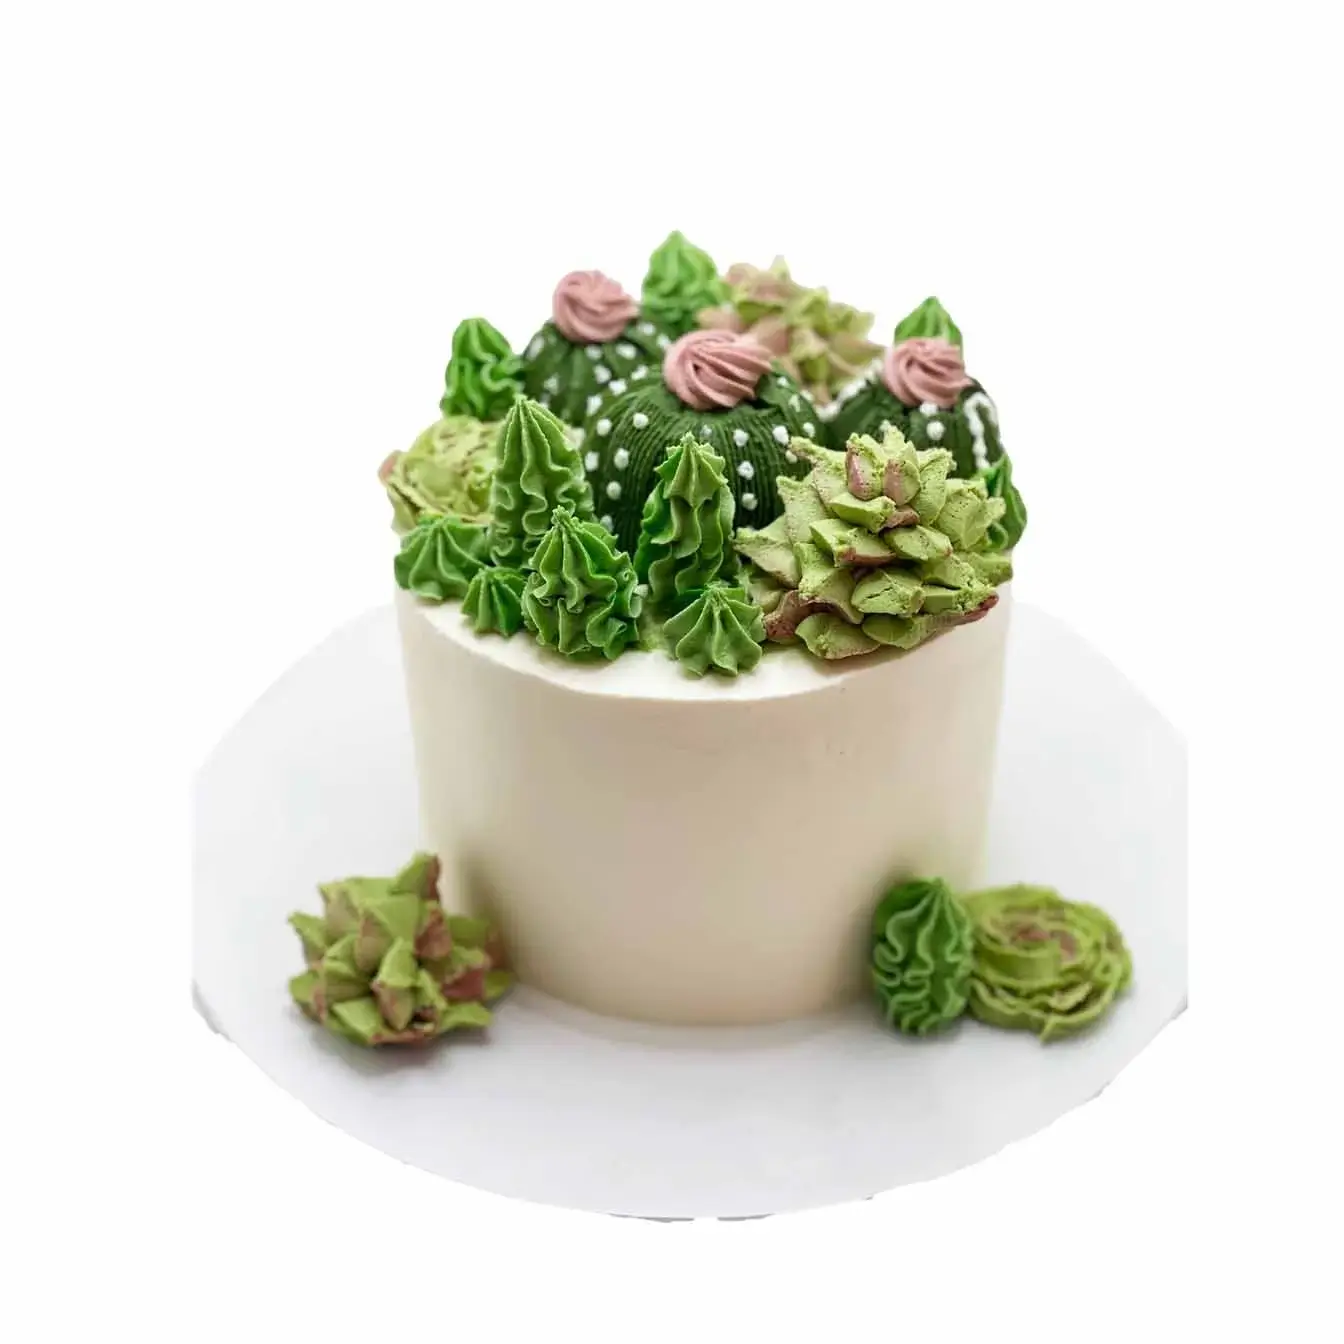 Succulent Serenity Cake - A cake adorned with intricately crafted edible succulents, a perfect centerpiece for garden-themed celebrations and nature enthusiasts.